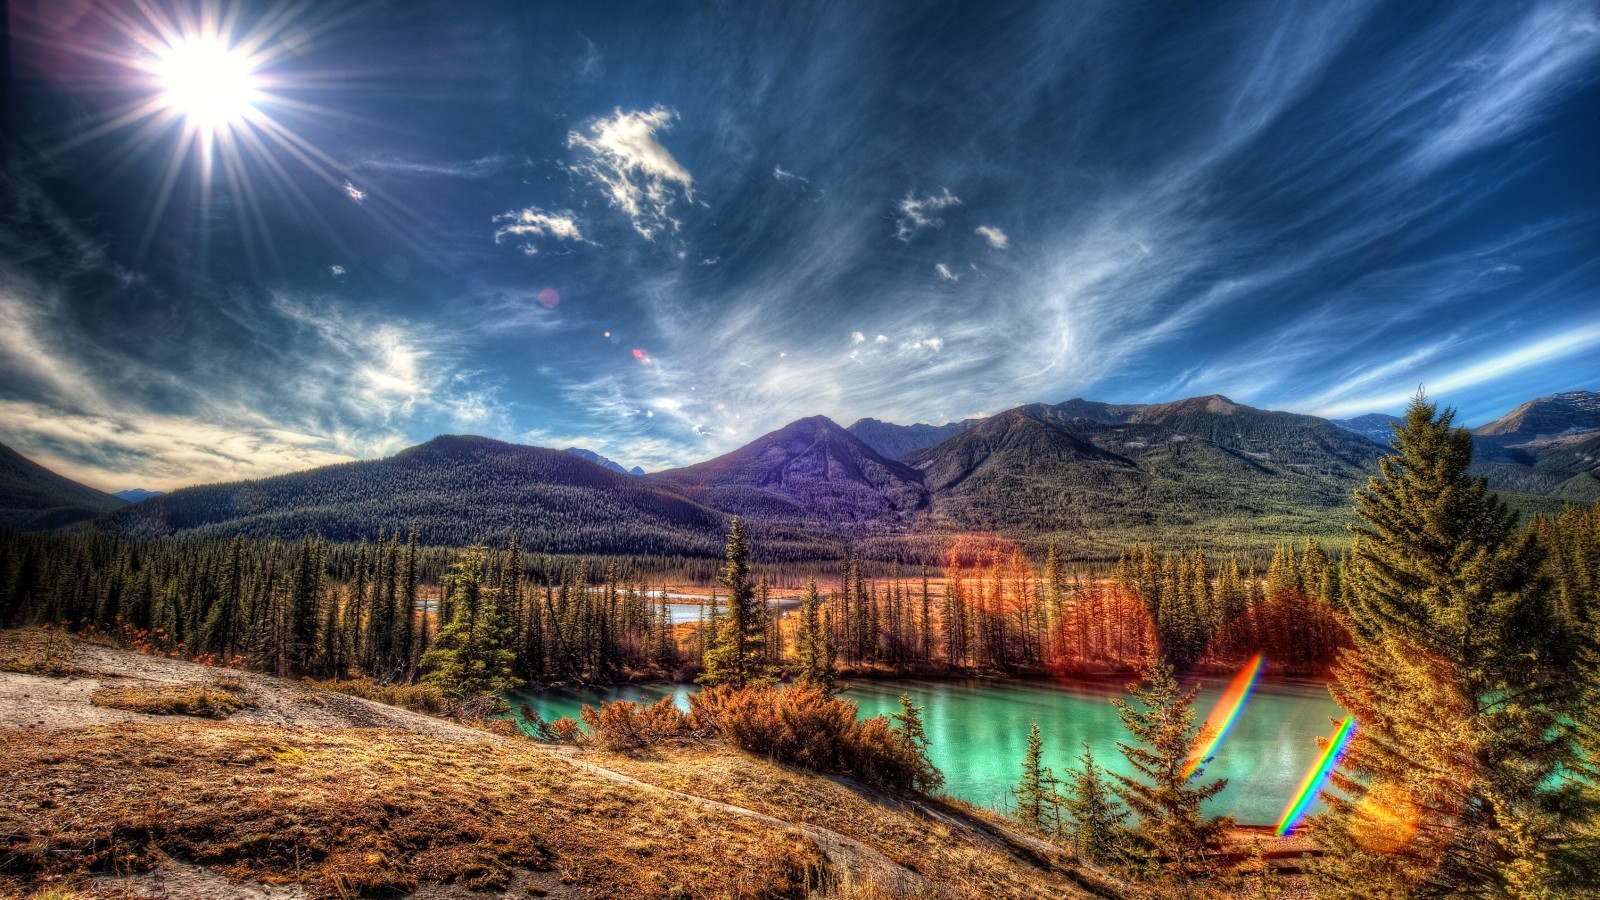 General 1600x900 landscape lens flare sun rays mountains lake pine trees nature